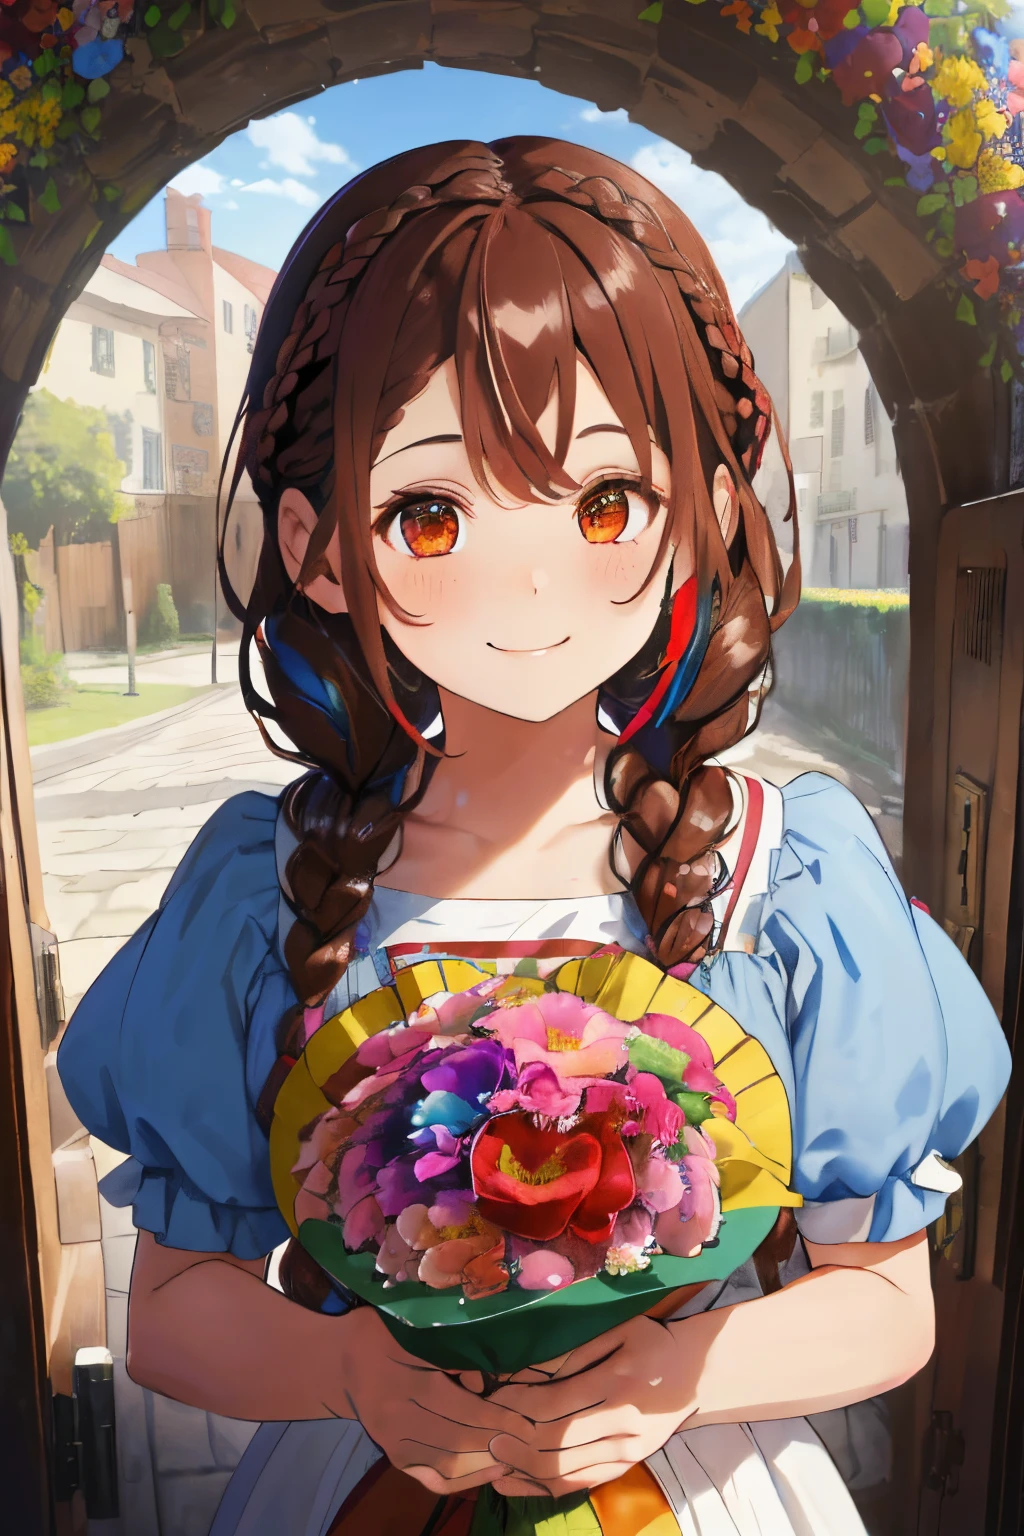 fluffy hair,dark brown hair,((Braided shorthair)),Slightly red tide,((Brown eyes)),((extra large colorful bouquet)),(Arched gate decorated with colorful flowers),A building shaped like a birdcage,((Overflowing smiles)),((close up of face))